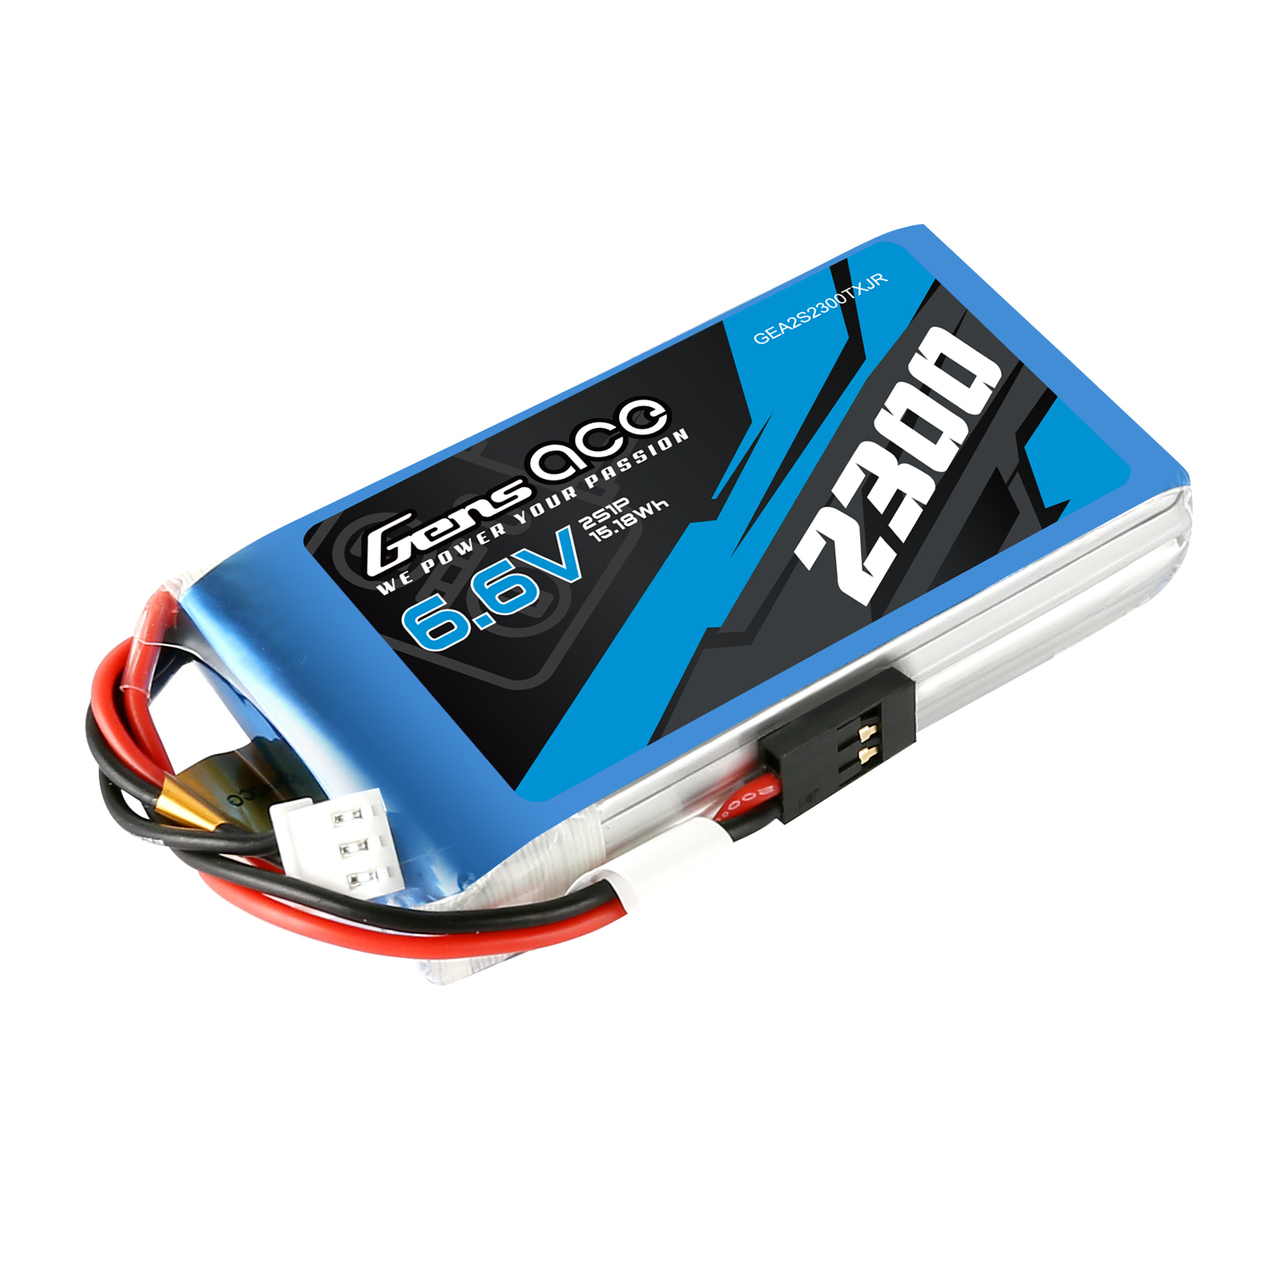 Gens ace 2300mAh  2S1P 6.6V TX LiFe Battery Pack with JR-3P Plug